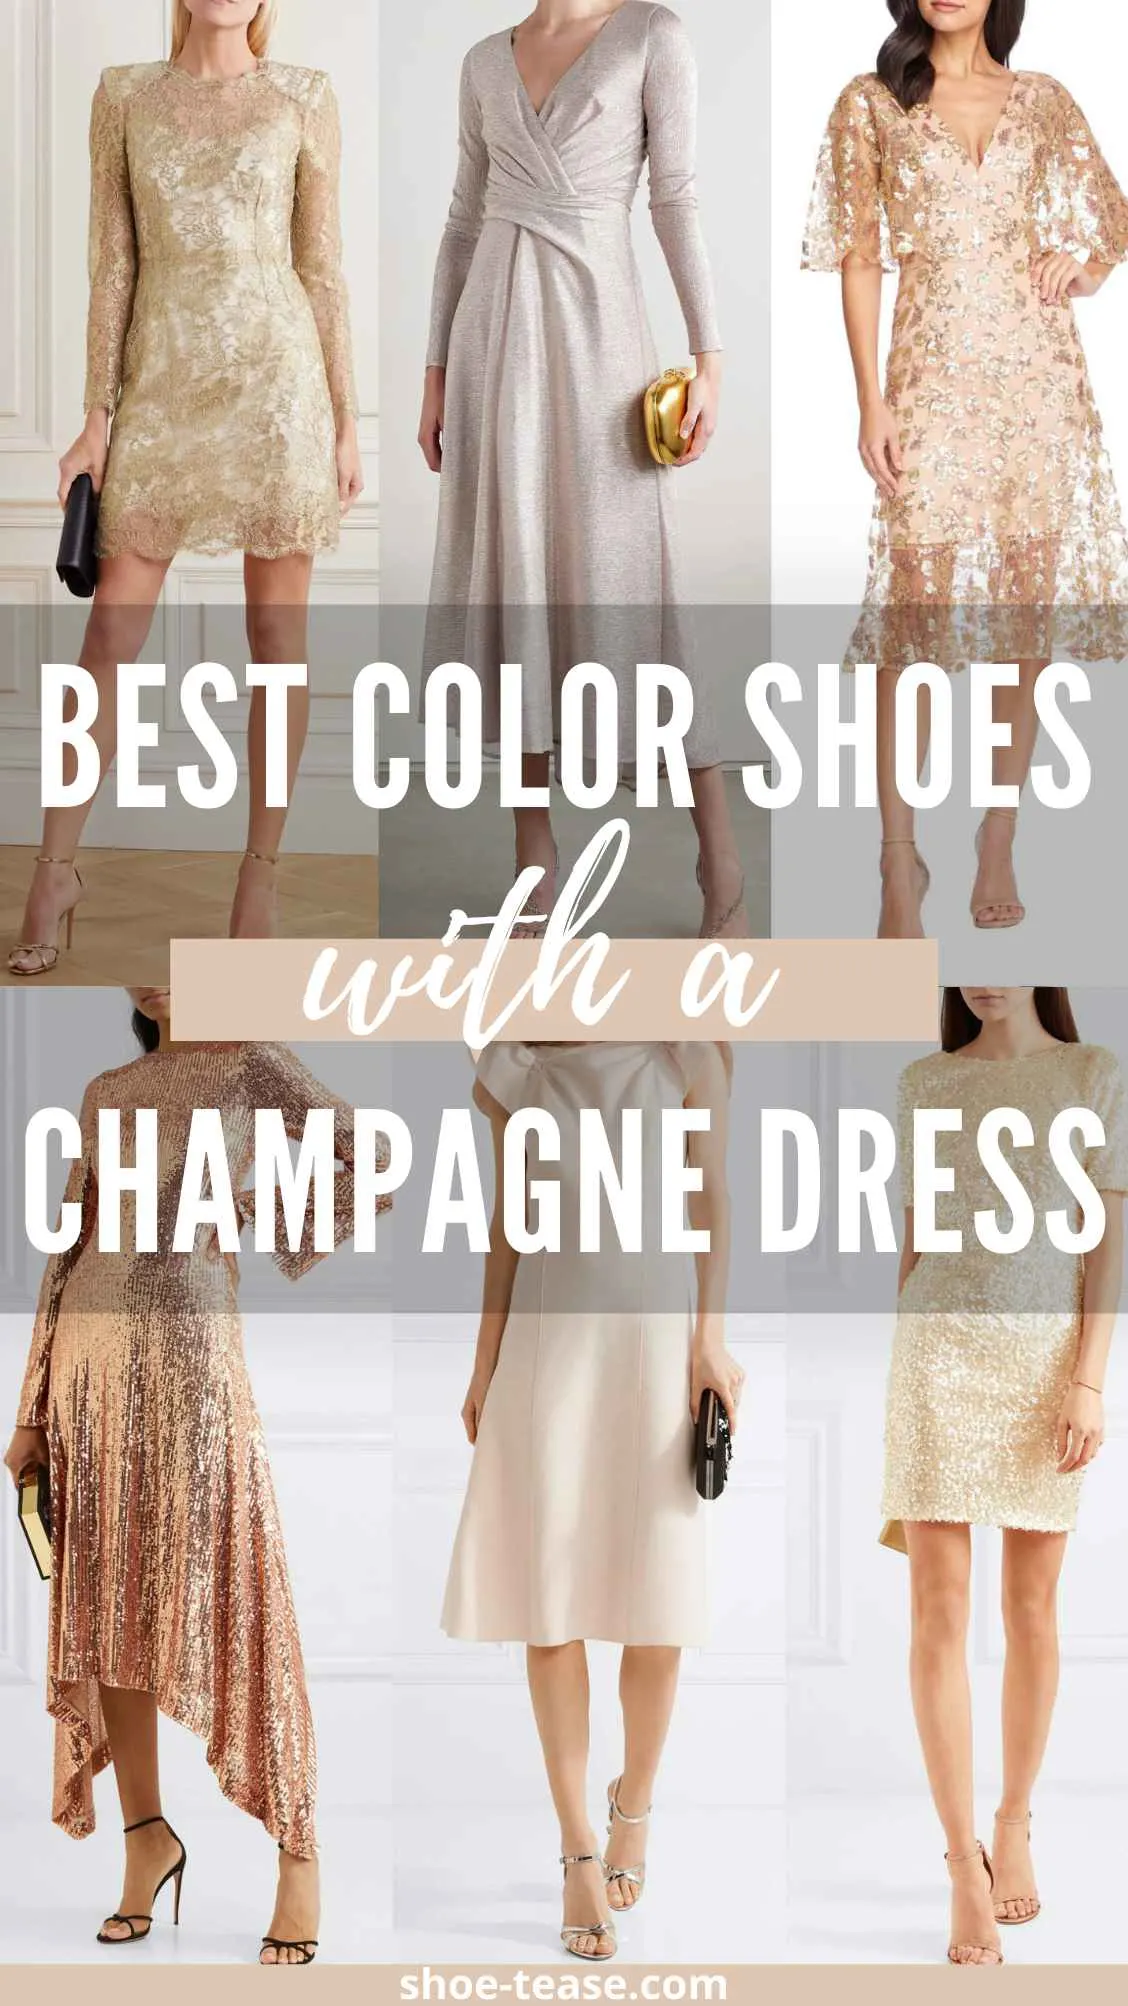 6 women wearing beige color shoes with champagne dresses